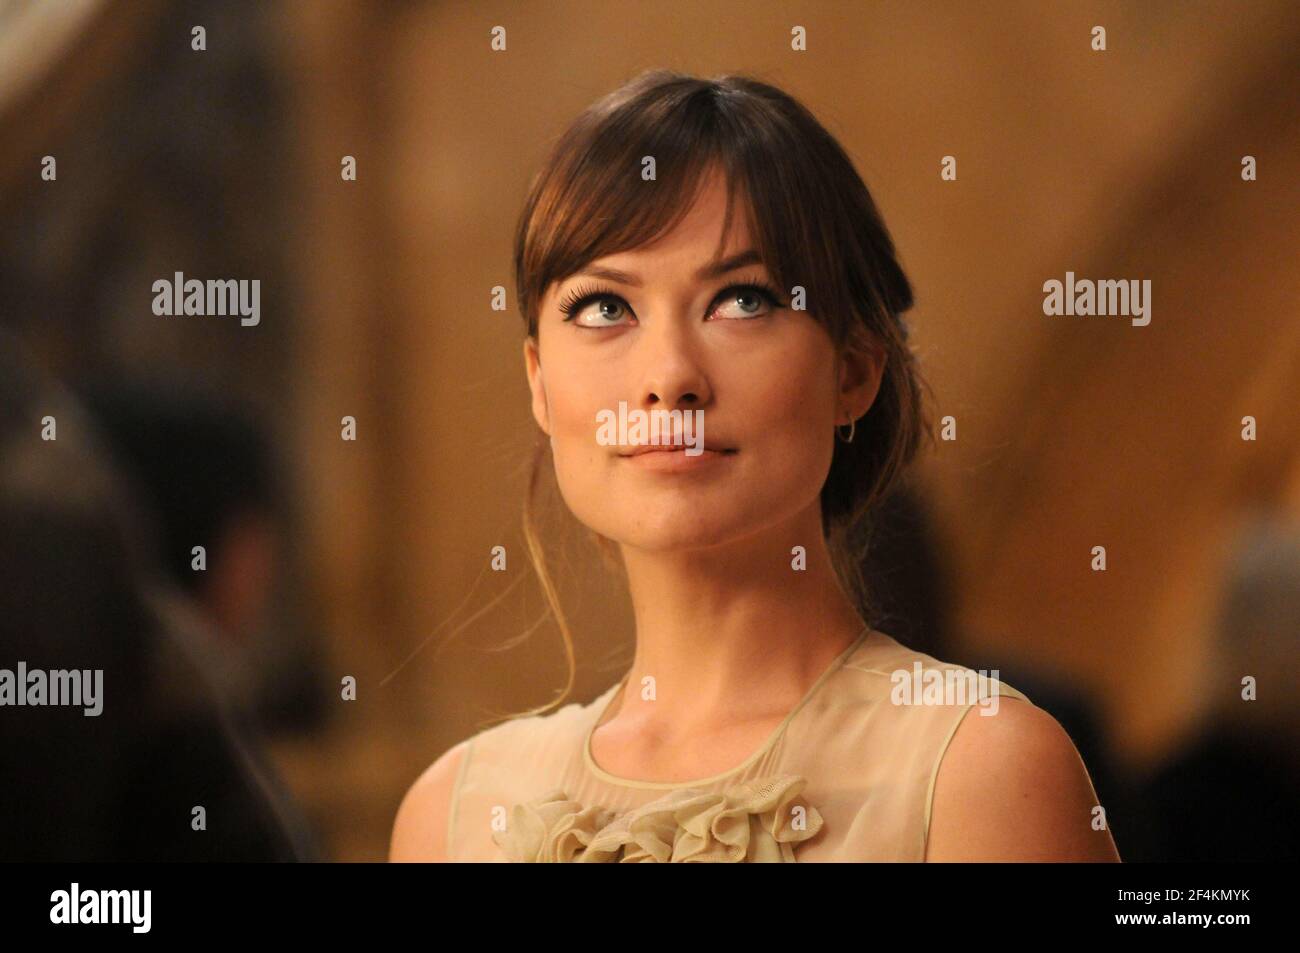 OLIVIA WILDE in THE LONGEST WEEK (2014), directed by PETER GLANZ. Copyright: Editorial use only. No merchandising or book covers. This is a publicly distributed handout. Access rights only, no license of copyright provided. Only to be reproduced in conjunction with promotion of this film. Stock Photo